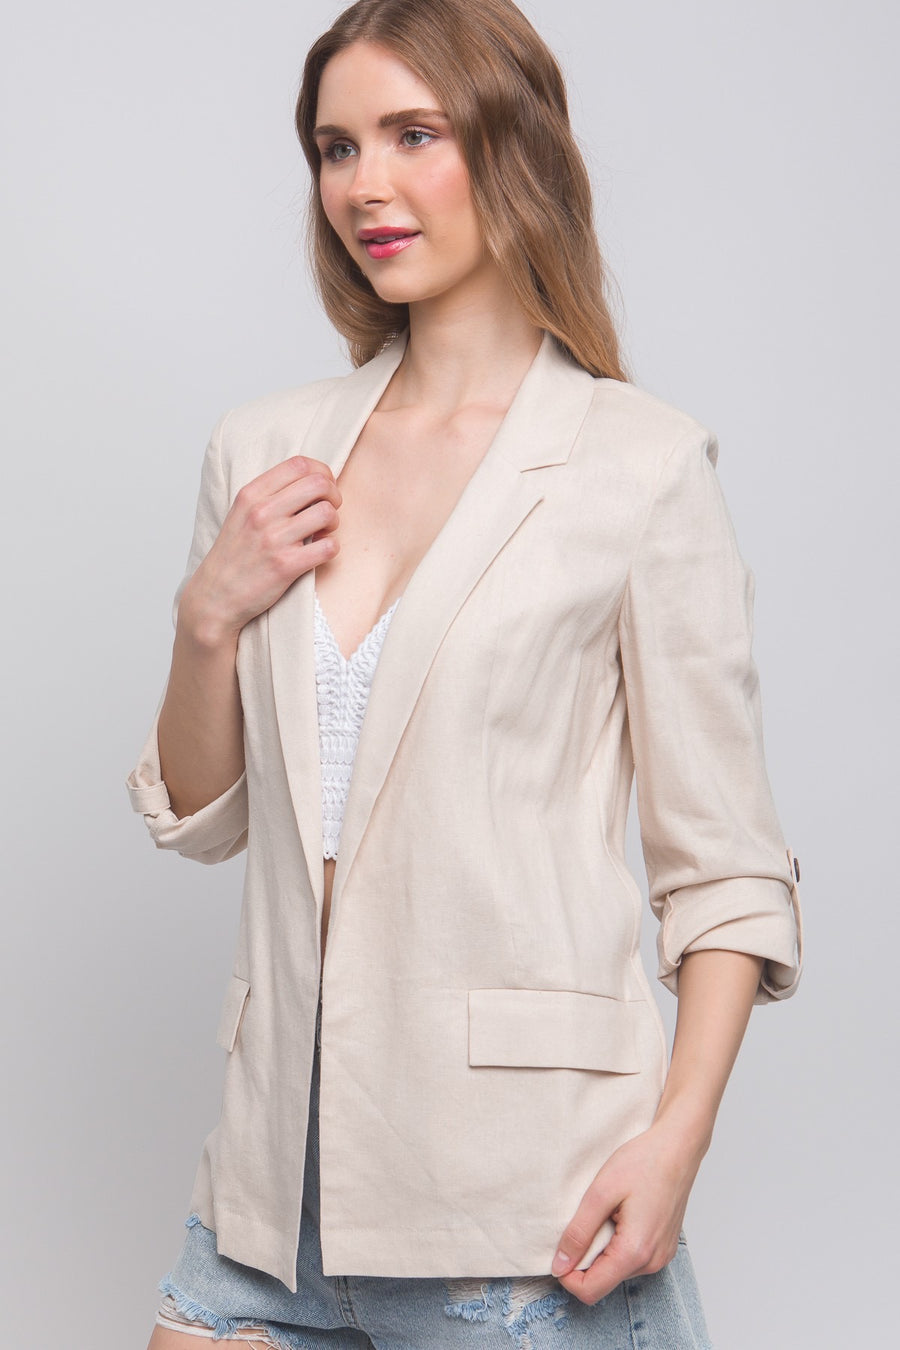 Linen blazer in the color natural